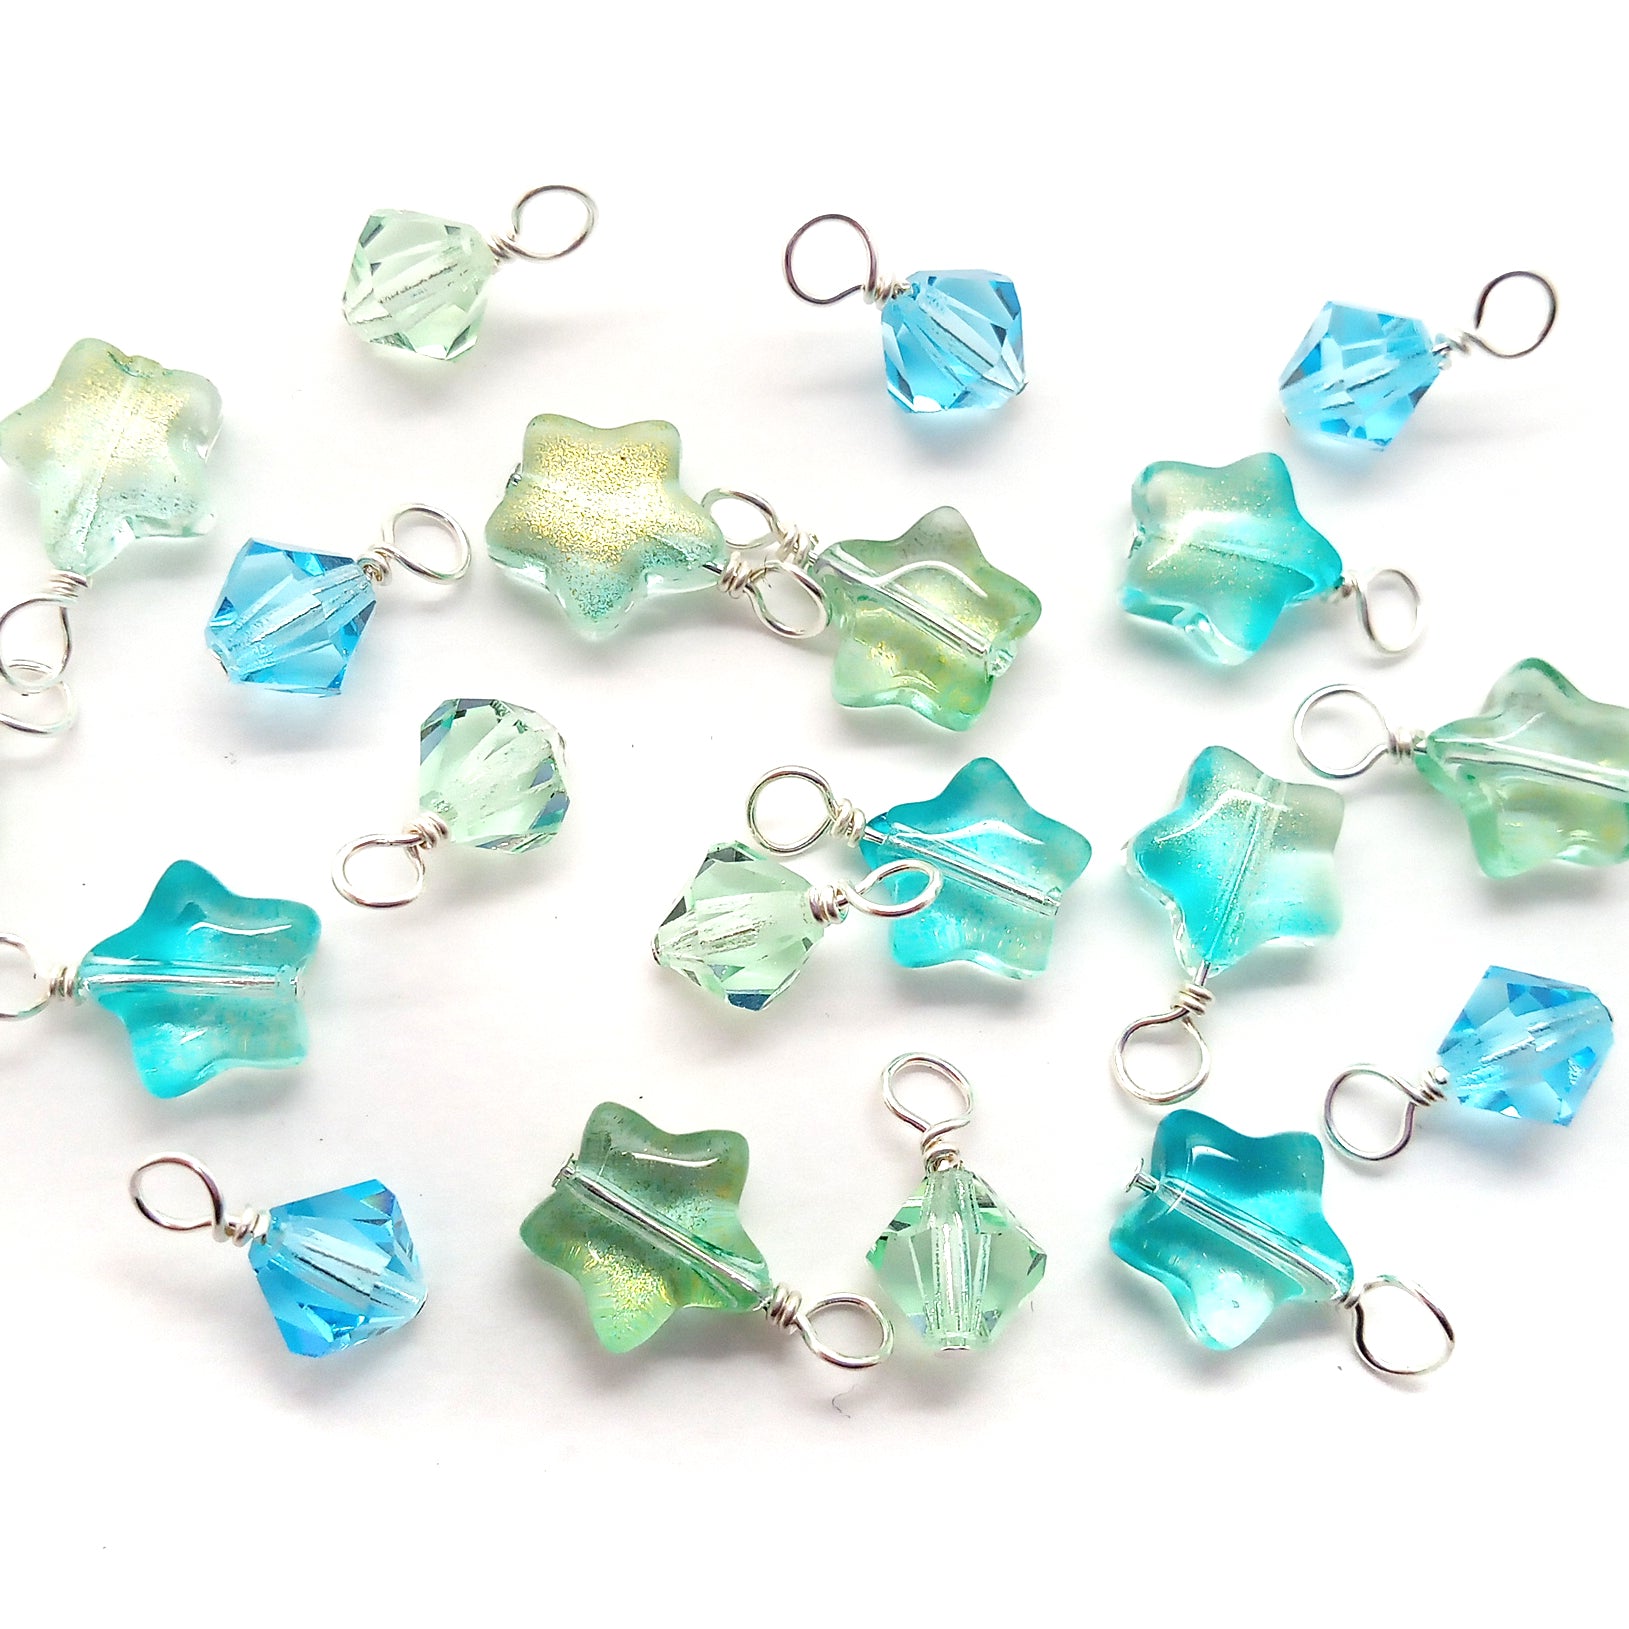 Pretty light blue and green glass star bead charms and 6mm crystal bicone dangles.